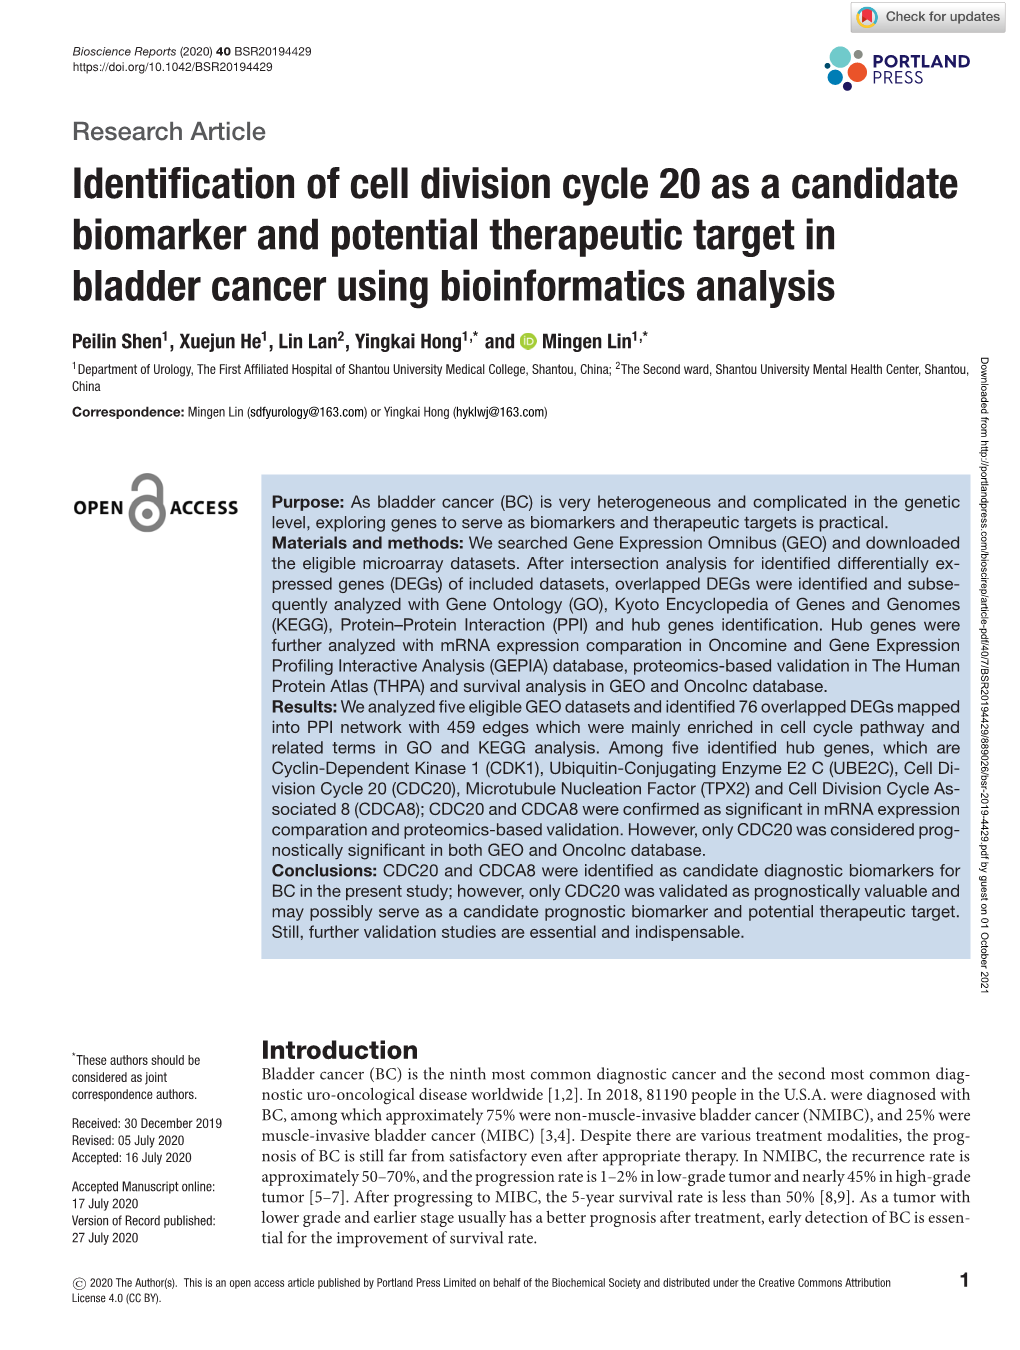 Identification of Cell Division Cycle 20 As a Candidate Biomarker And